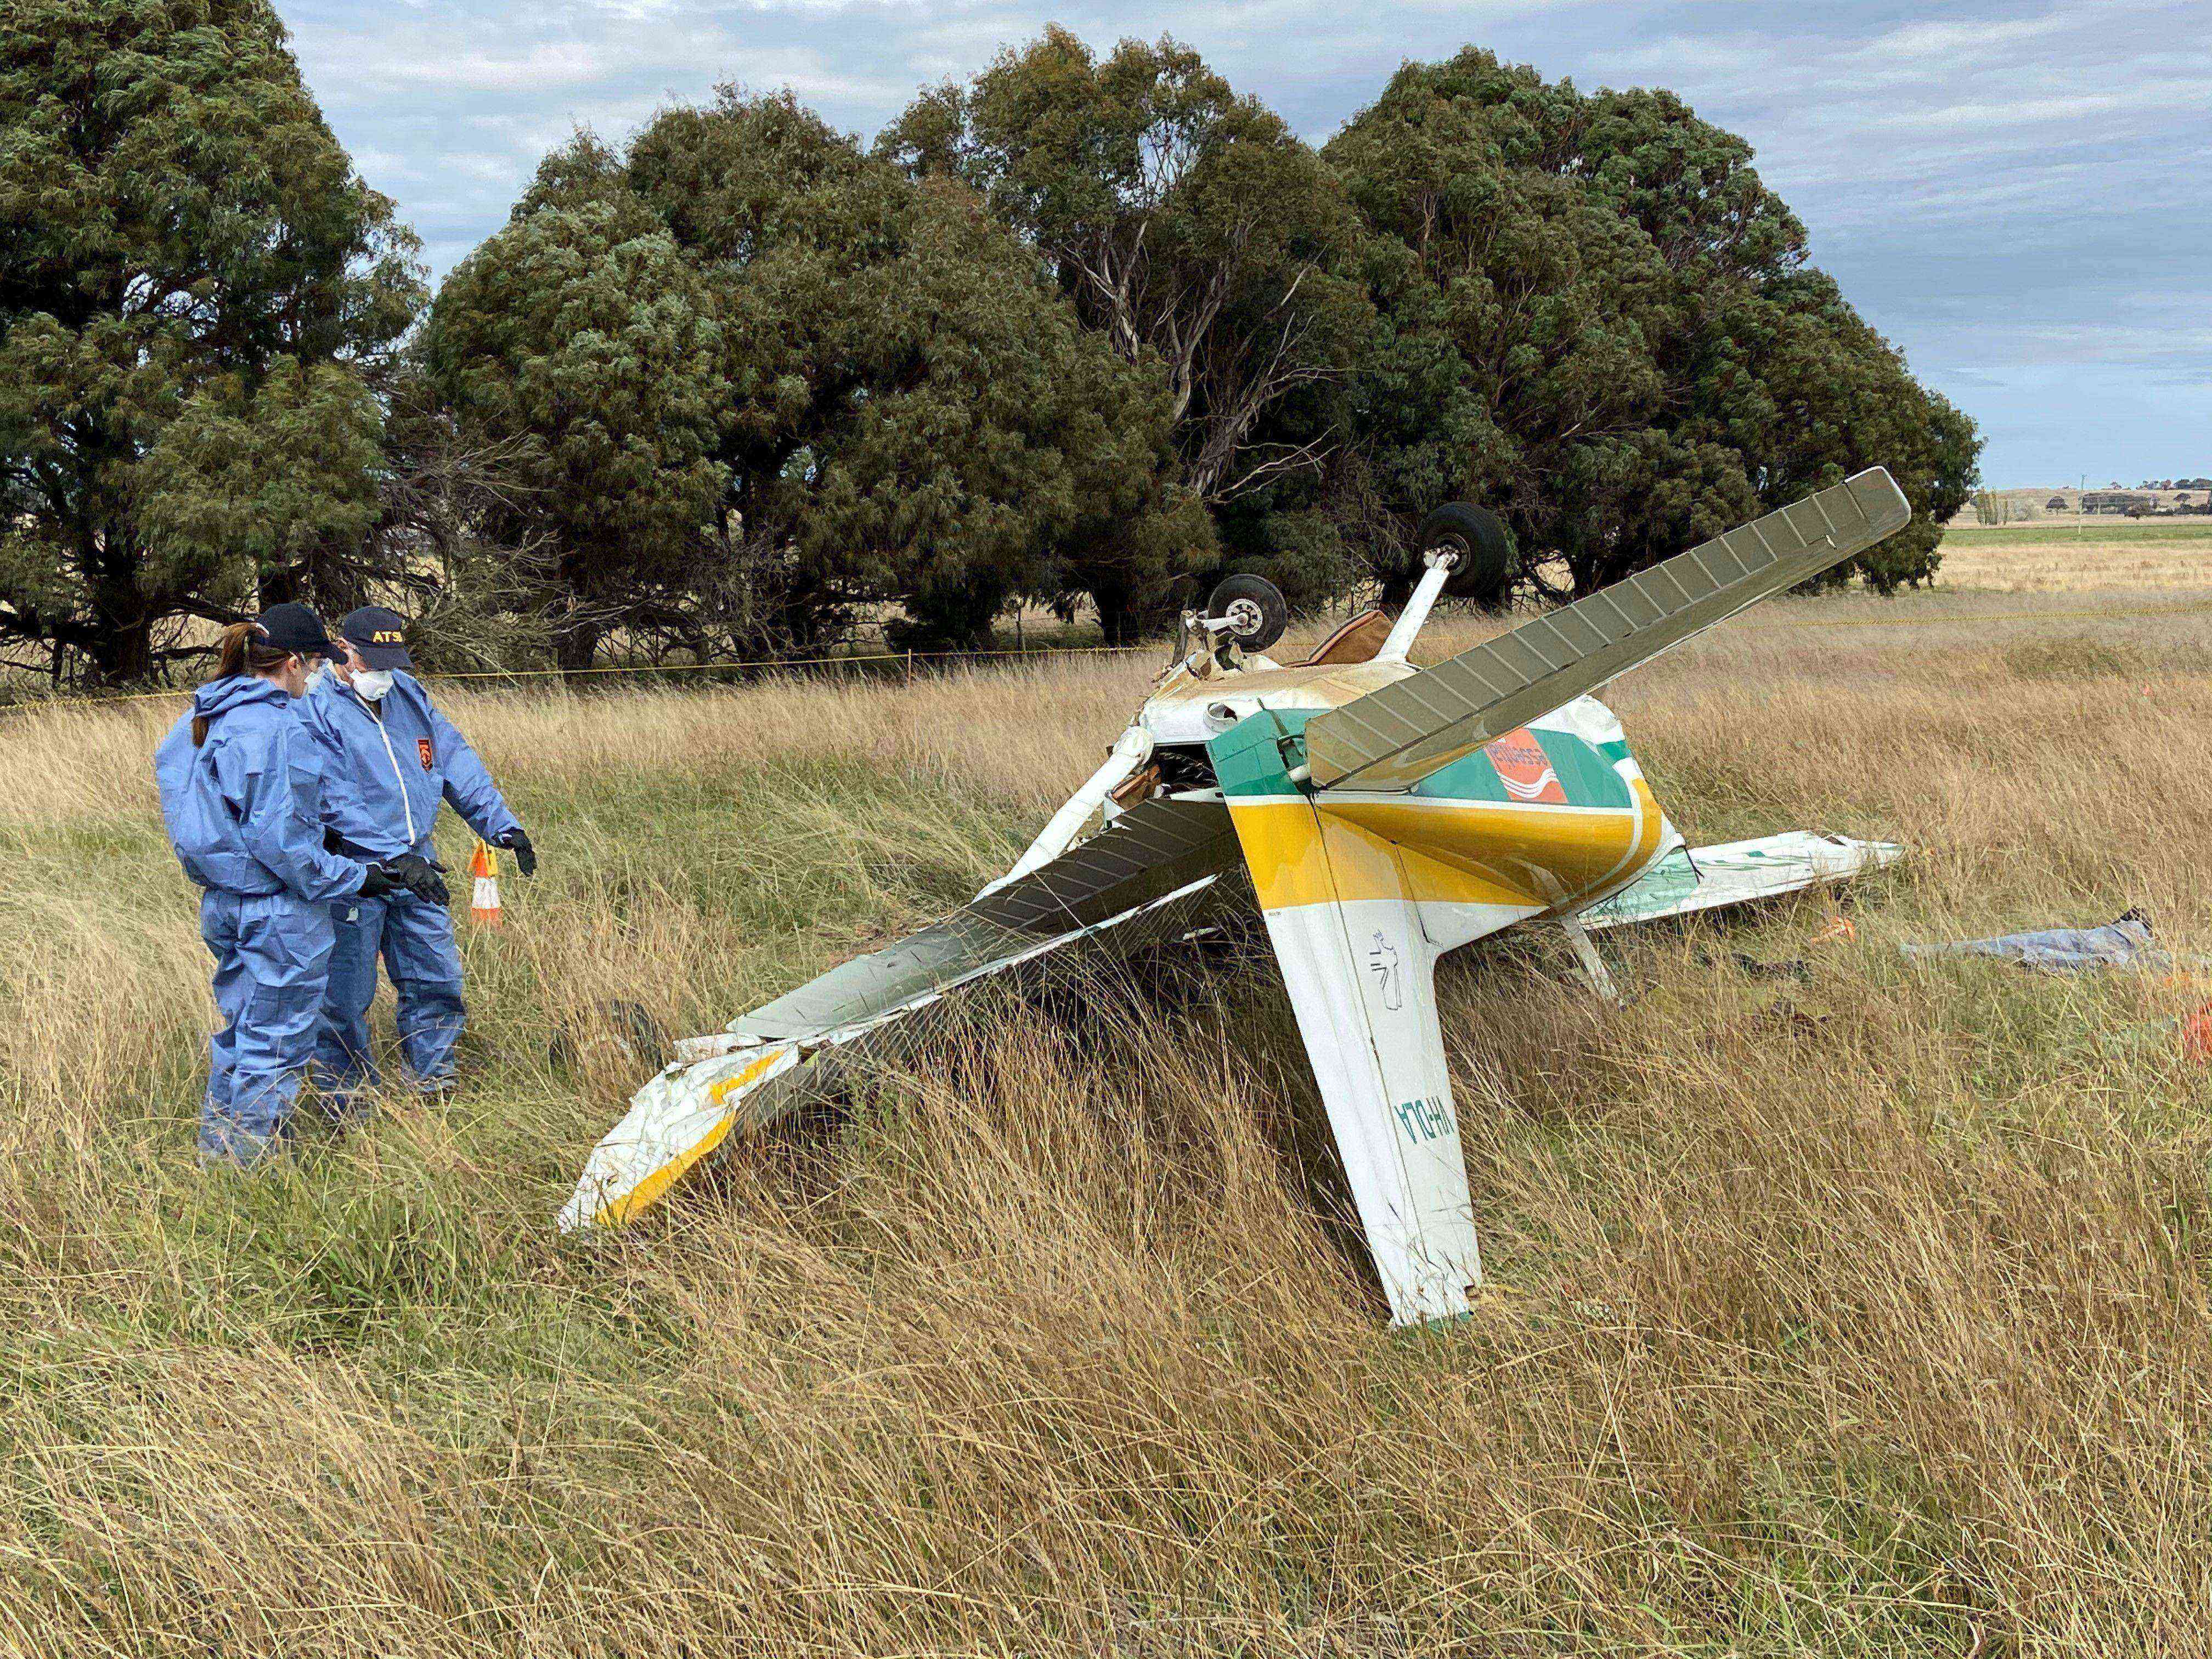 Plane went into spin before crashing nose first, says ATSB report